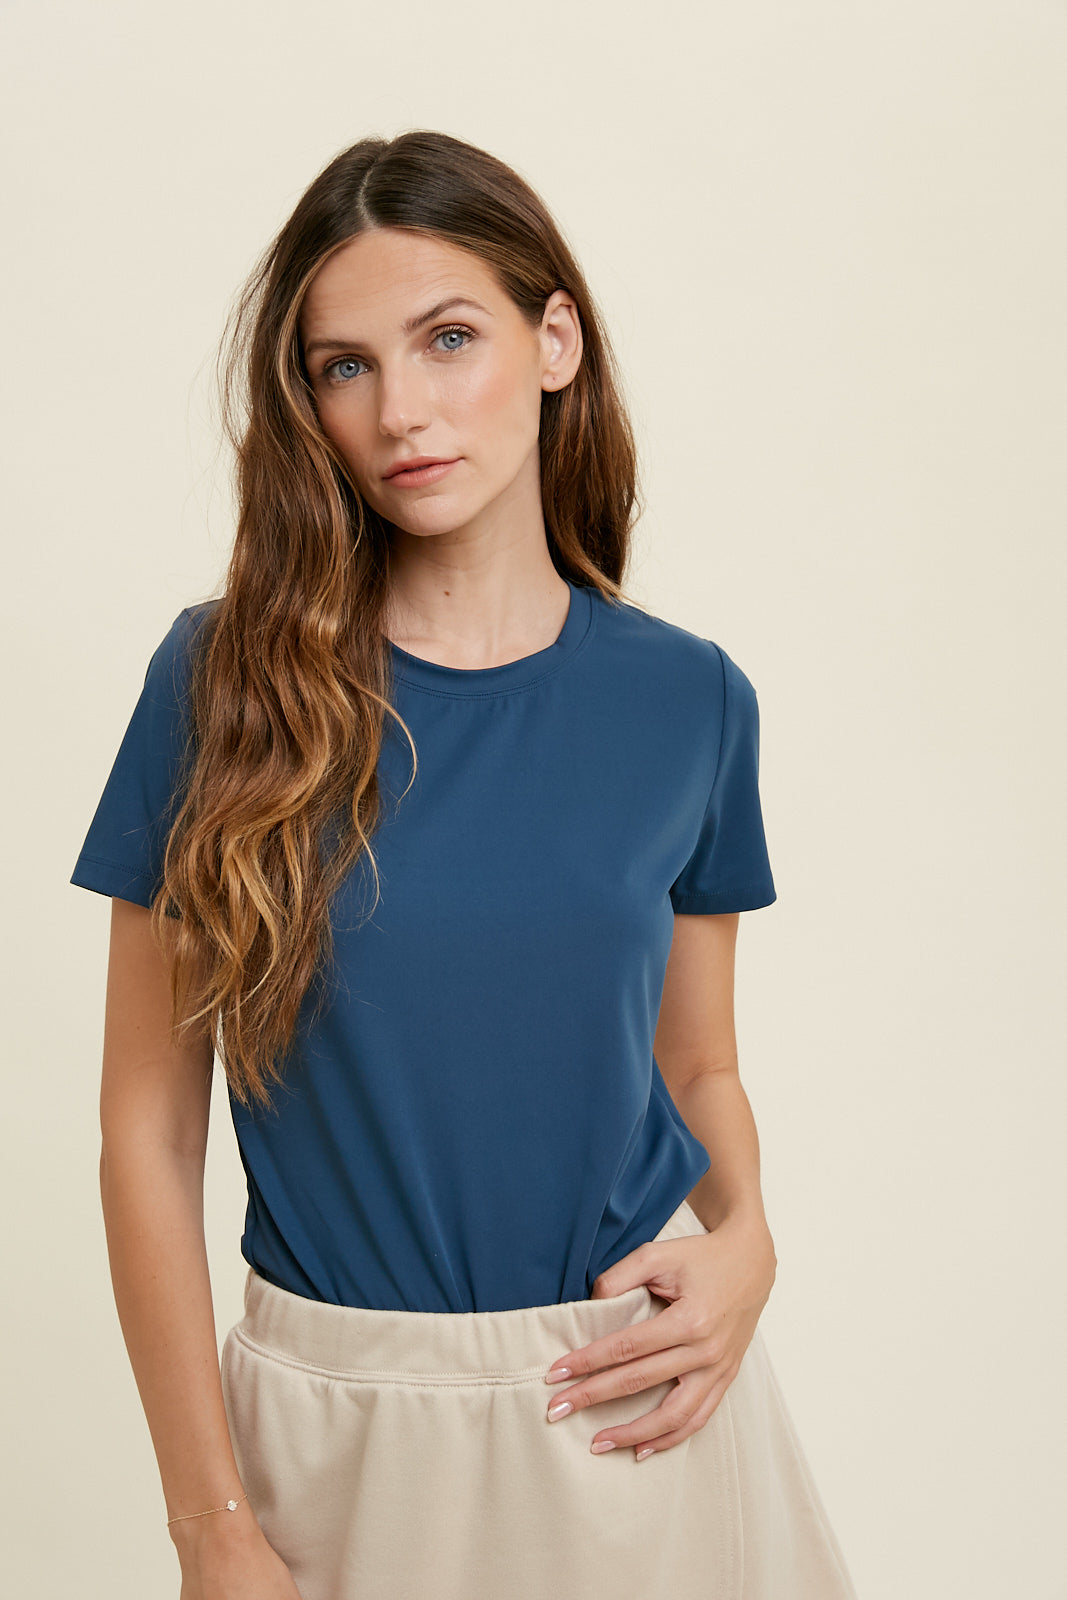 Smoothing Short Sleeve Top -  Teal